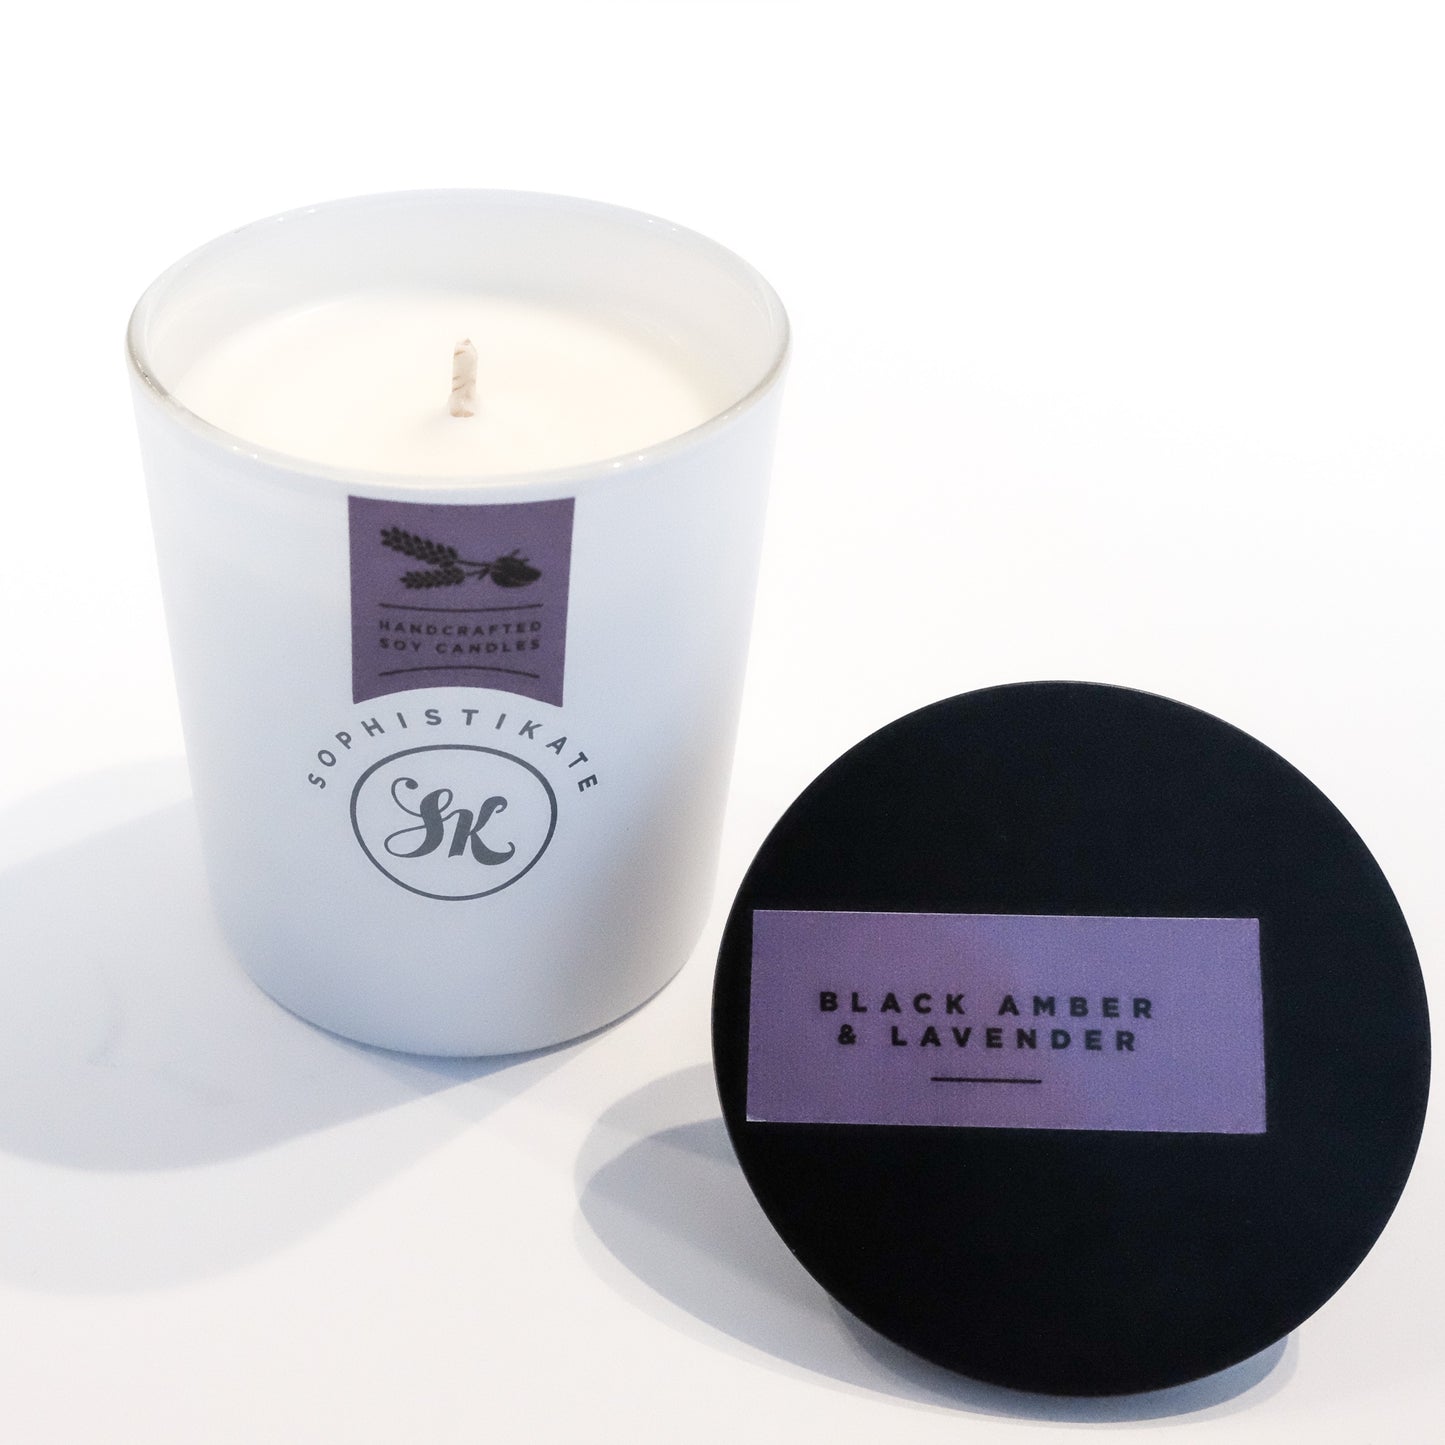 Black Amber & Lavender Soy Wax Candle wick shown and lid on the side - SophistiKate Australia